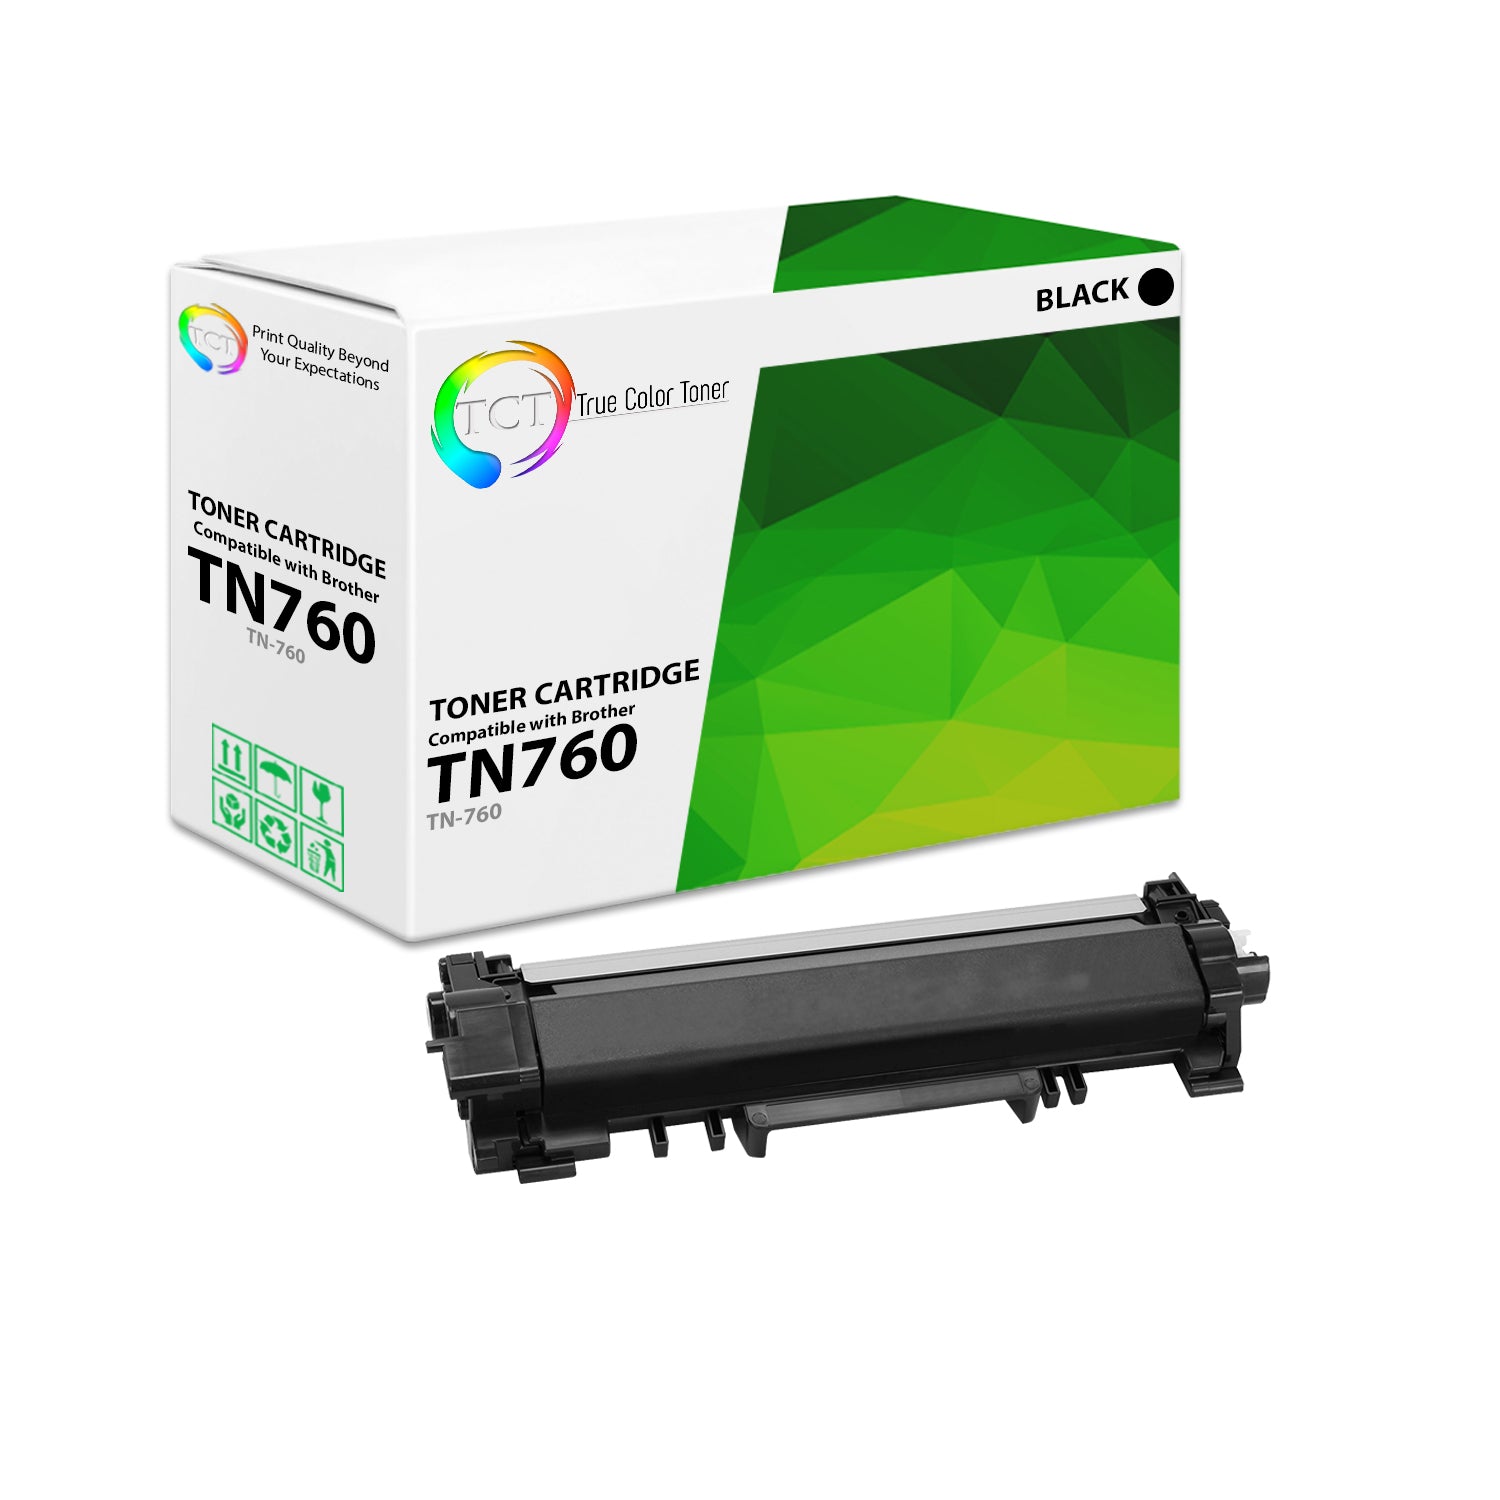 TCT Compatible High Yield Toner Cartridge Replacement for the Brother TN760 Series - 1 Pack Black